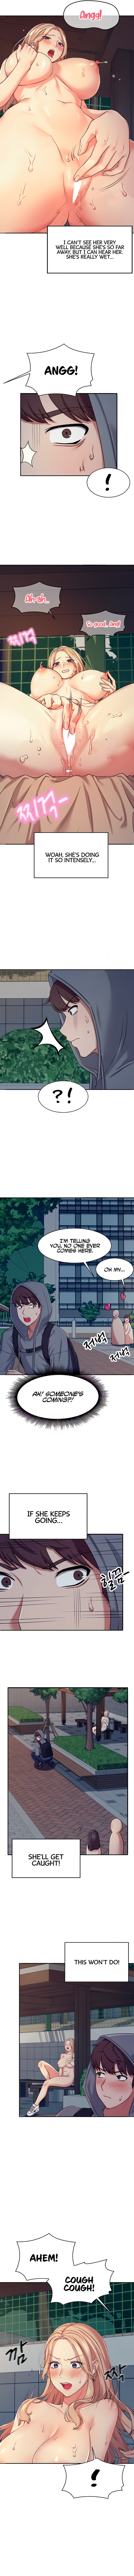 [OB, Overtime Sloth] Is There No Goddess in My College? Ch.12/? [English] [Manhwa PDF]